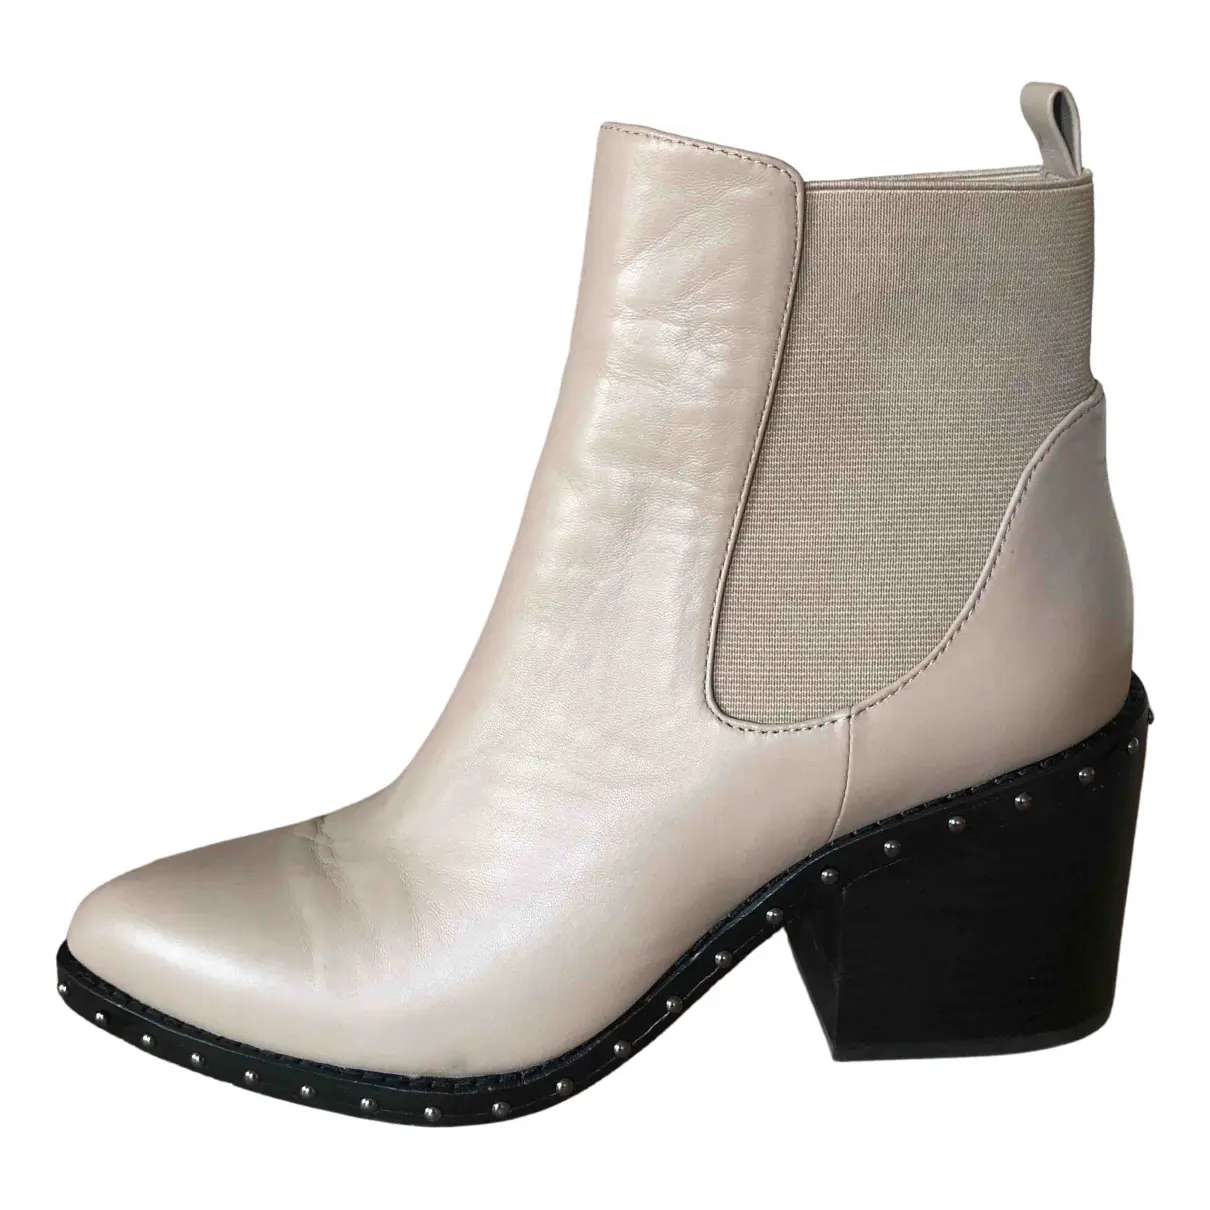 Leather boots 10 Crosby by Derek Lam